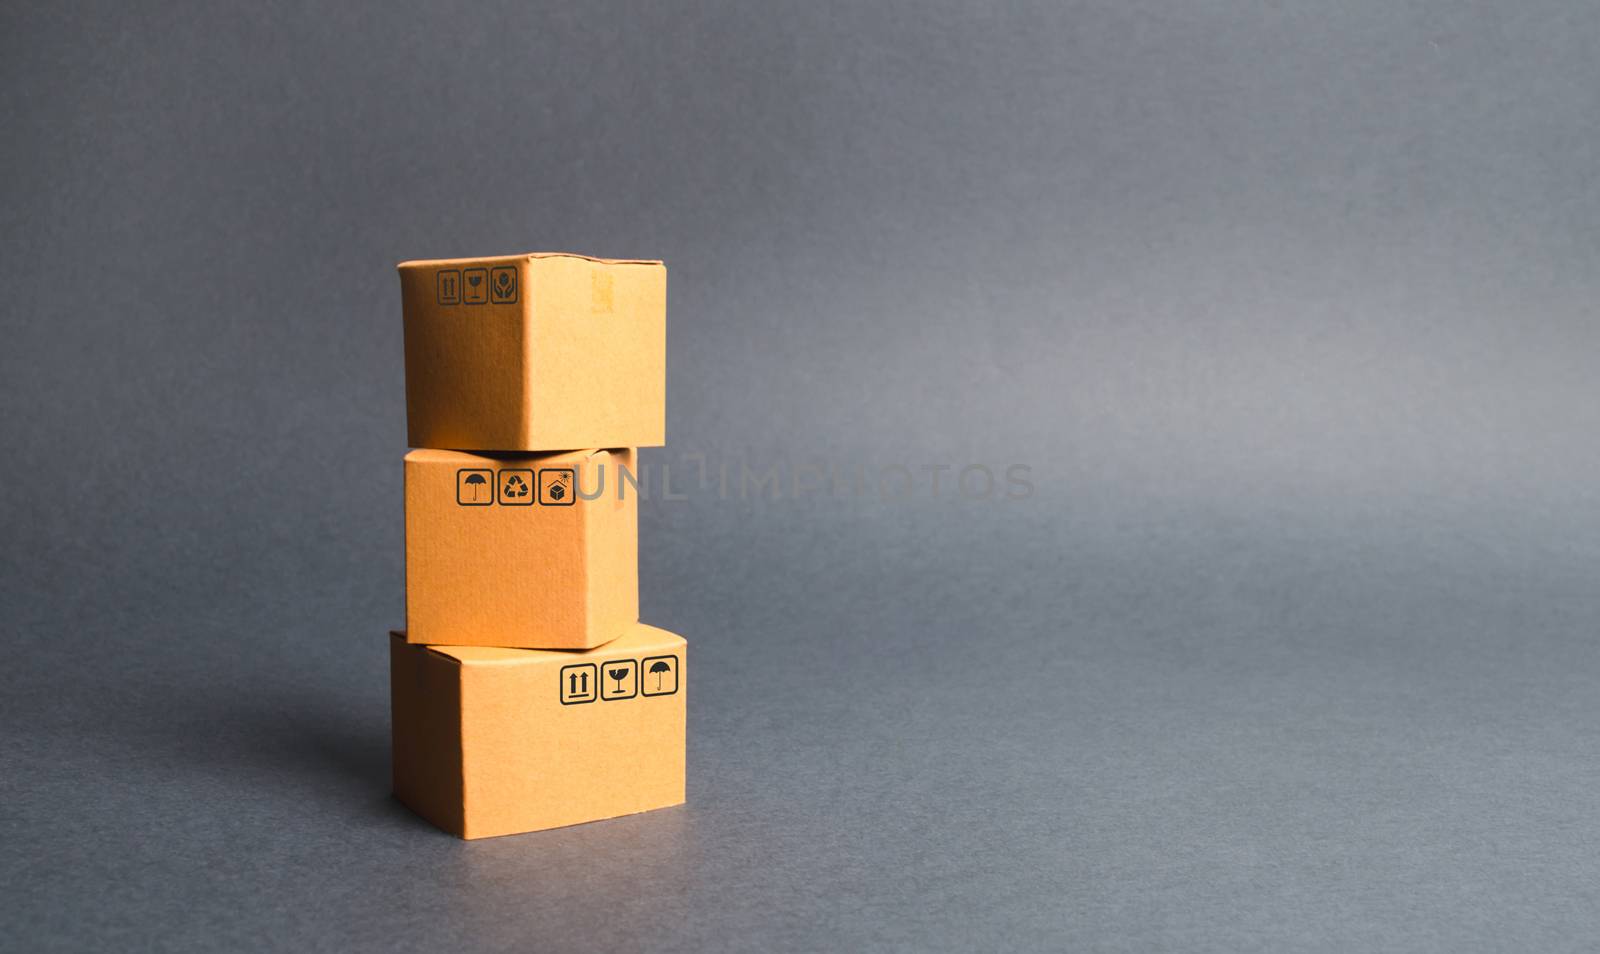 A bunch of three cardboard boxes. The concept of products and goods, commerce and retail. E-commerce, sales and sale of goods through online trading platform. Import and export of products